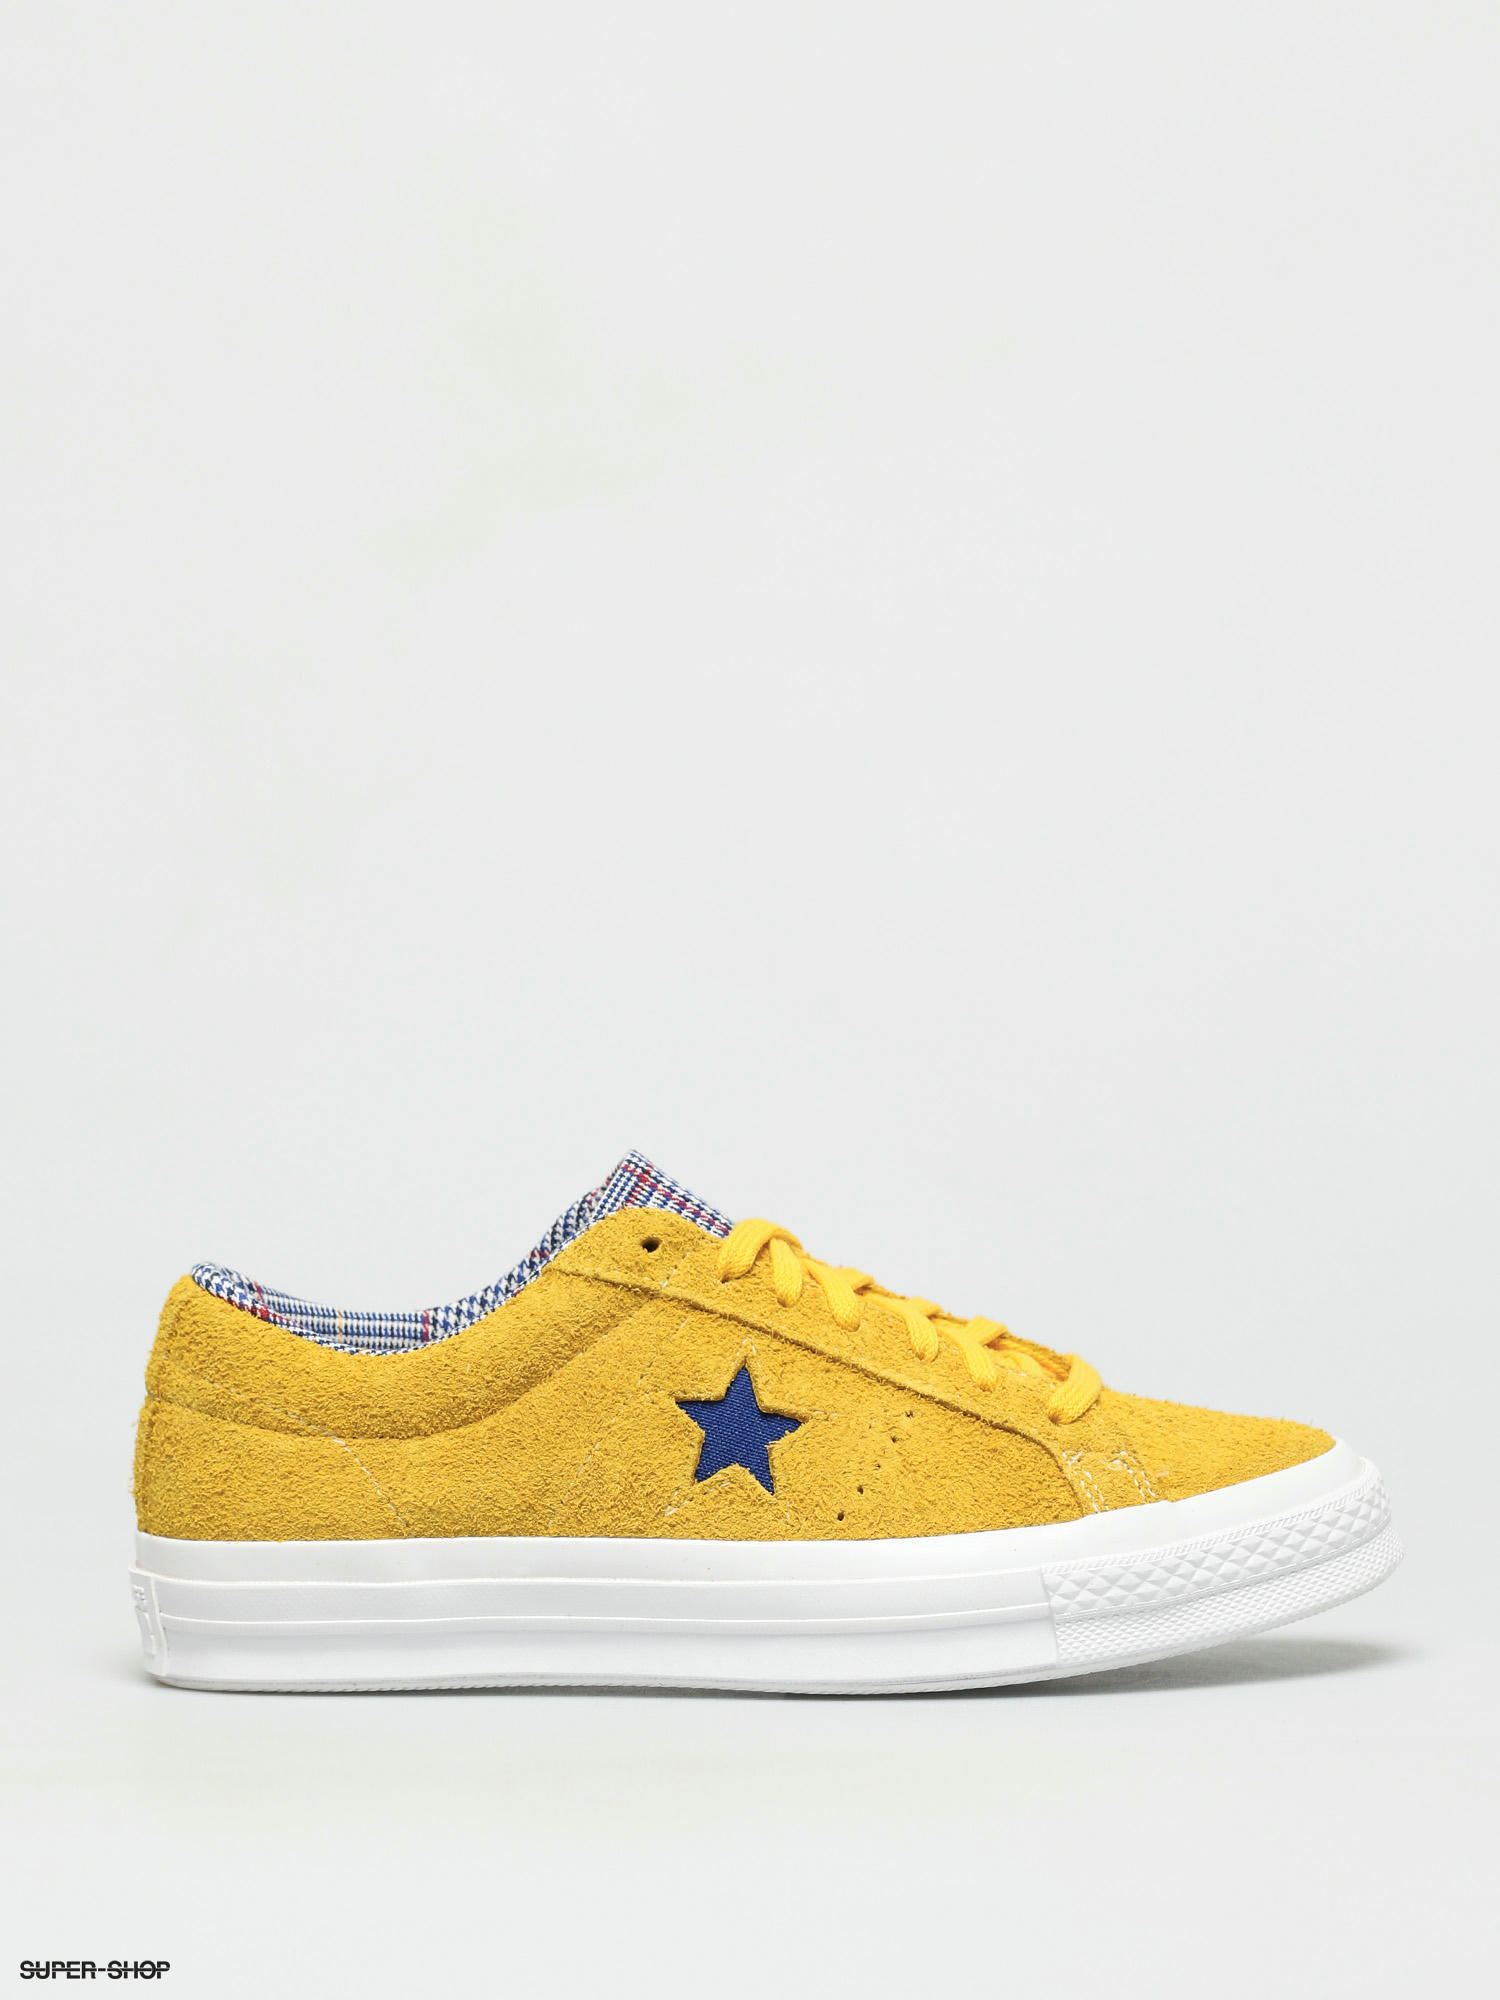 yellow suede converse one star